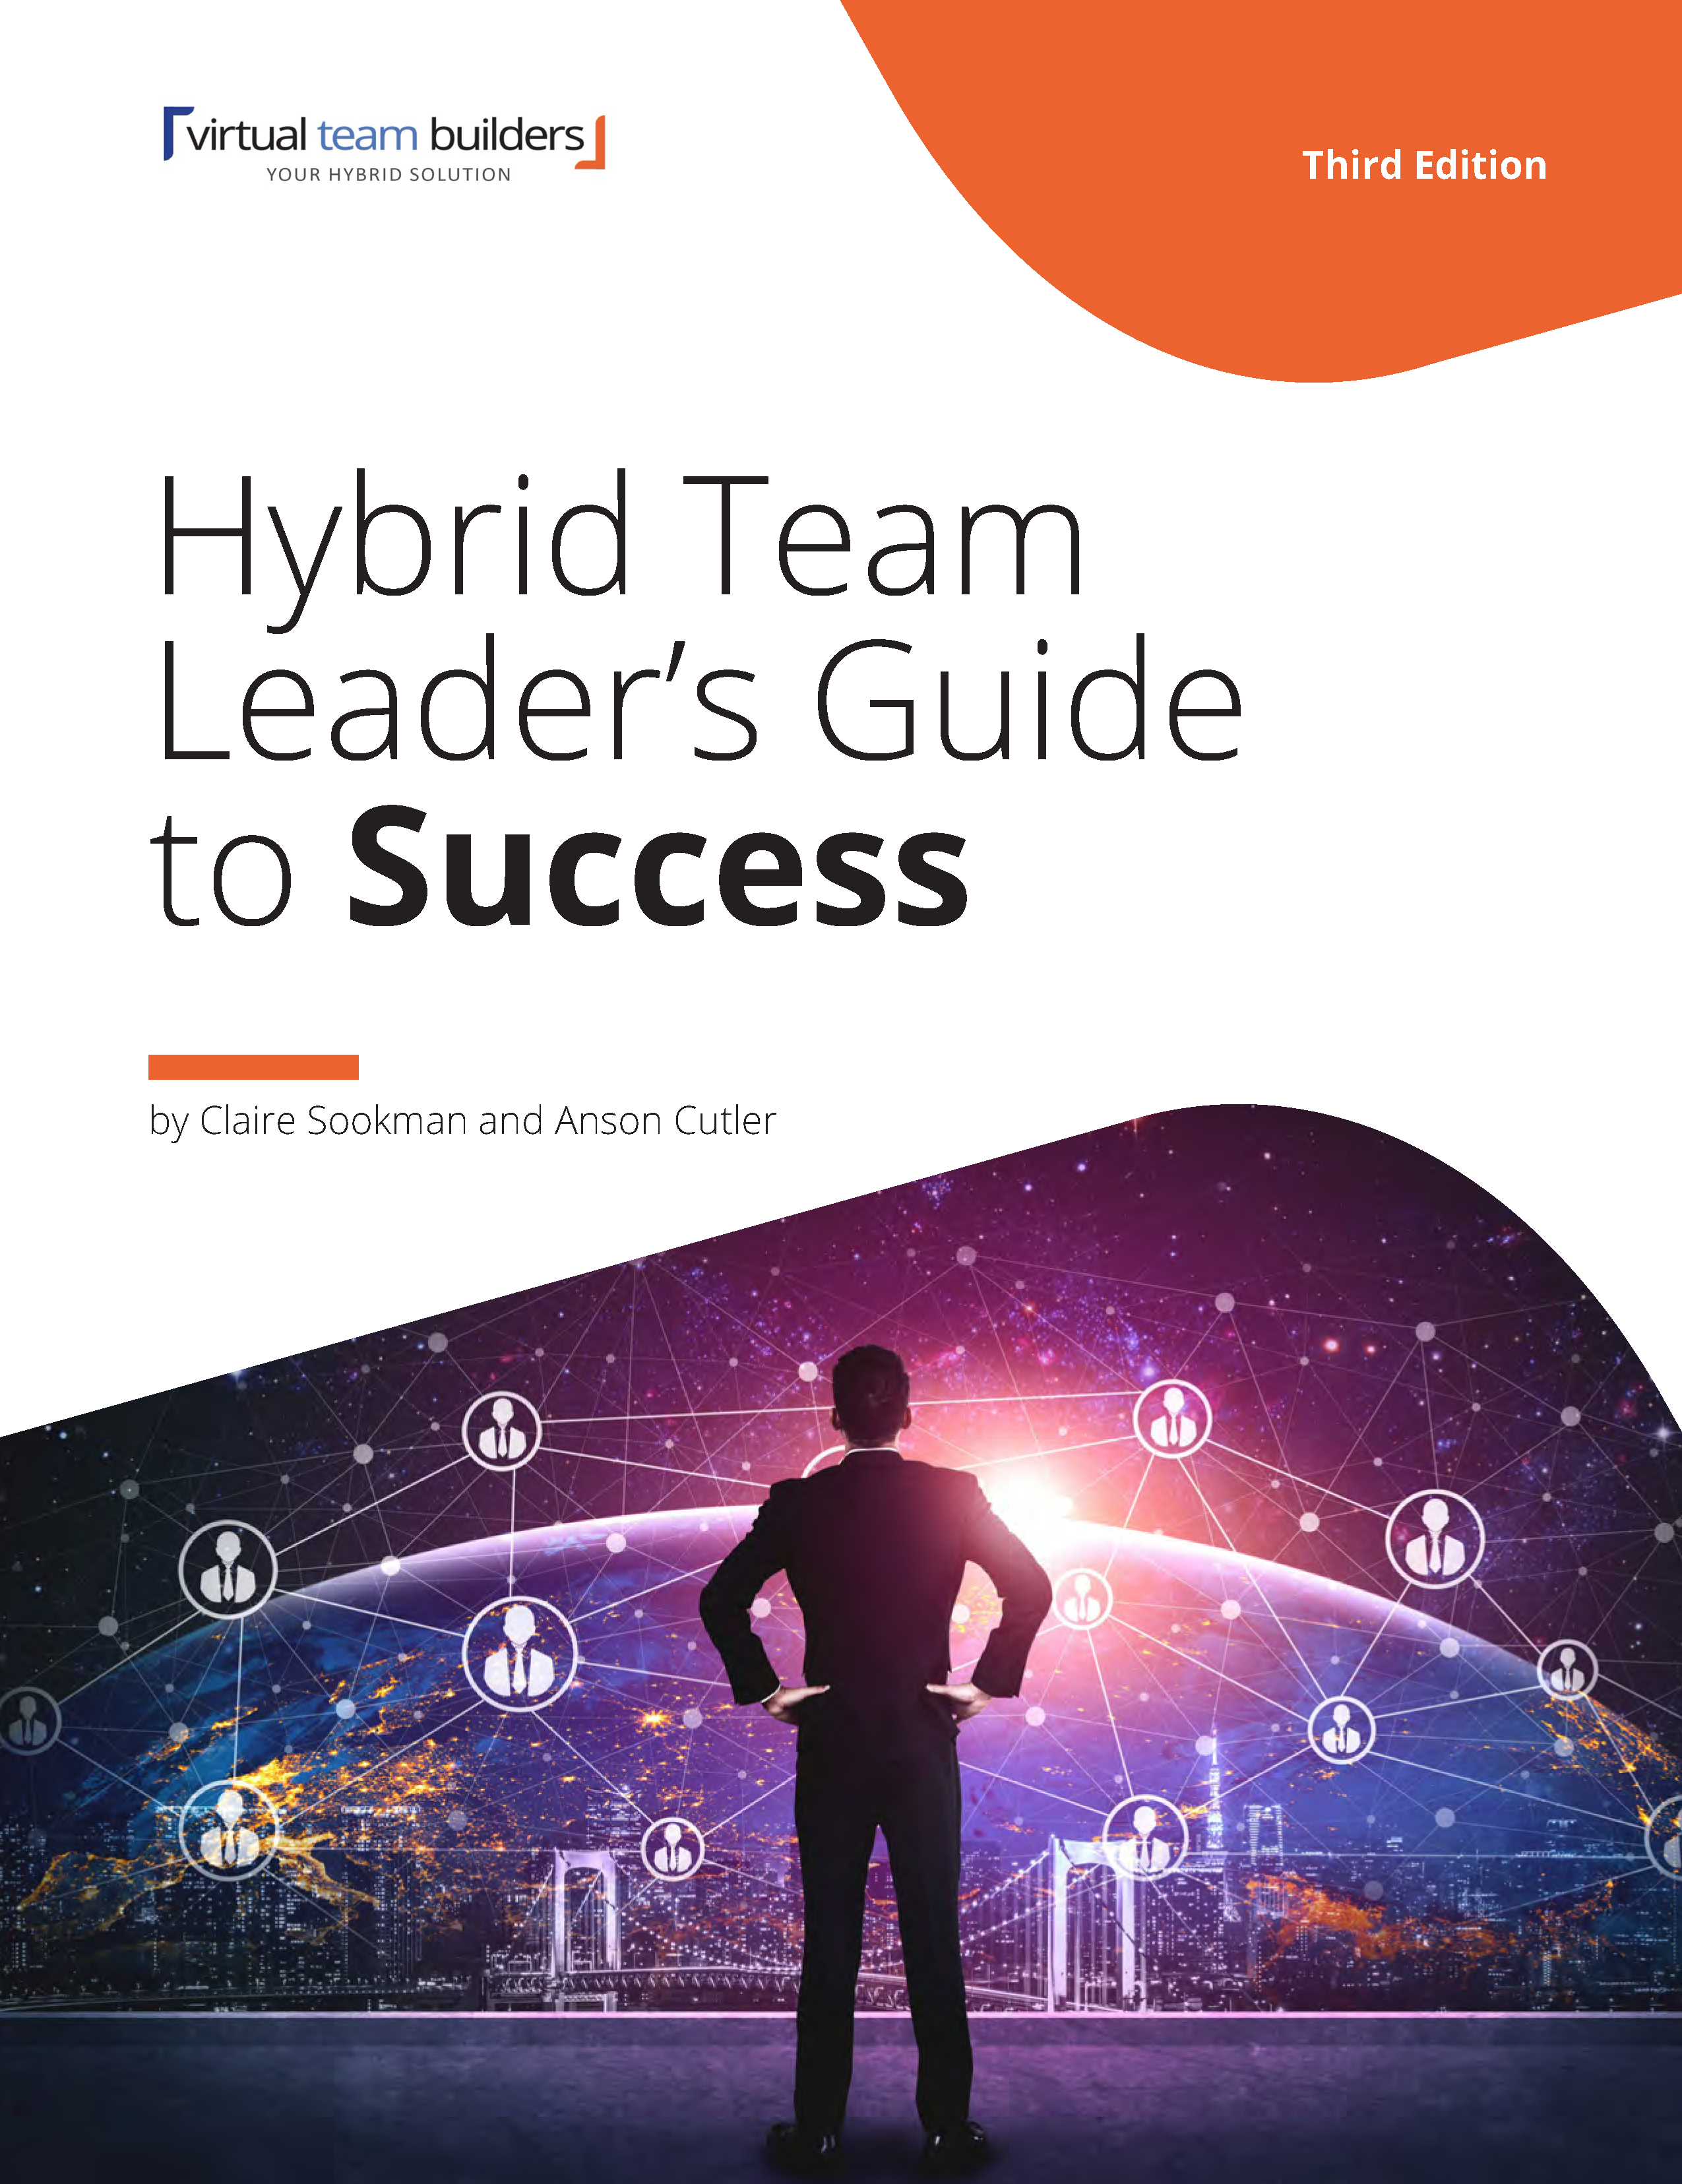 Hybrid Leader's Guide to Success